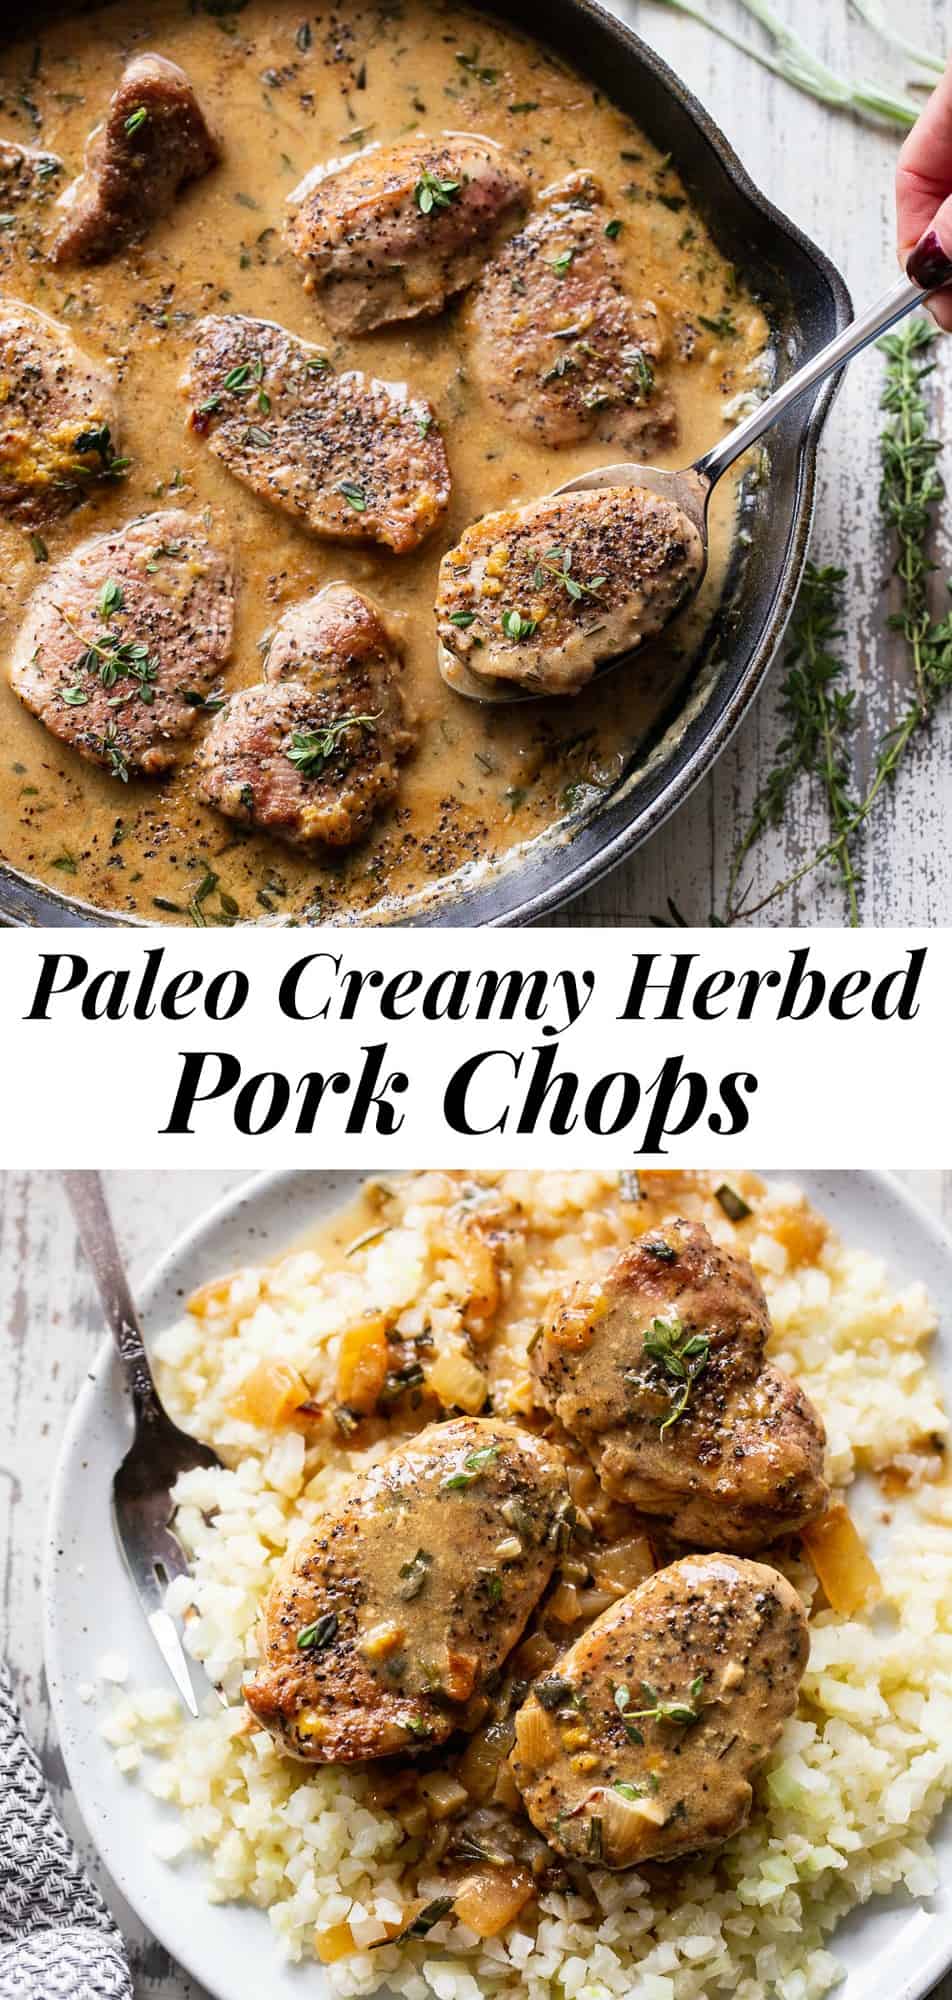 This creamy herbed pork skillet is easy to throw together and so comforting. Pork medallions or chops are seasoned, browned, and cooked with fresh herbs in a delicious cream sauce you’d never know is dairy free! It’s perfect served over cauliflower rice to keep it paleo, Whole30 compliant and keto friendly. #paleo #whole30 #keto #cleaneating #lowcarb